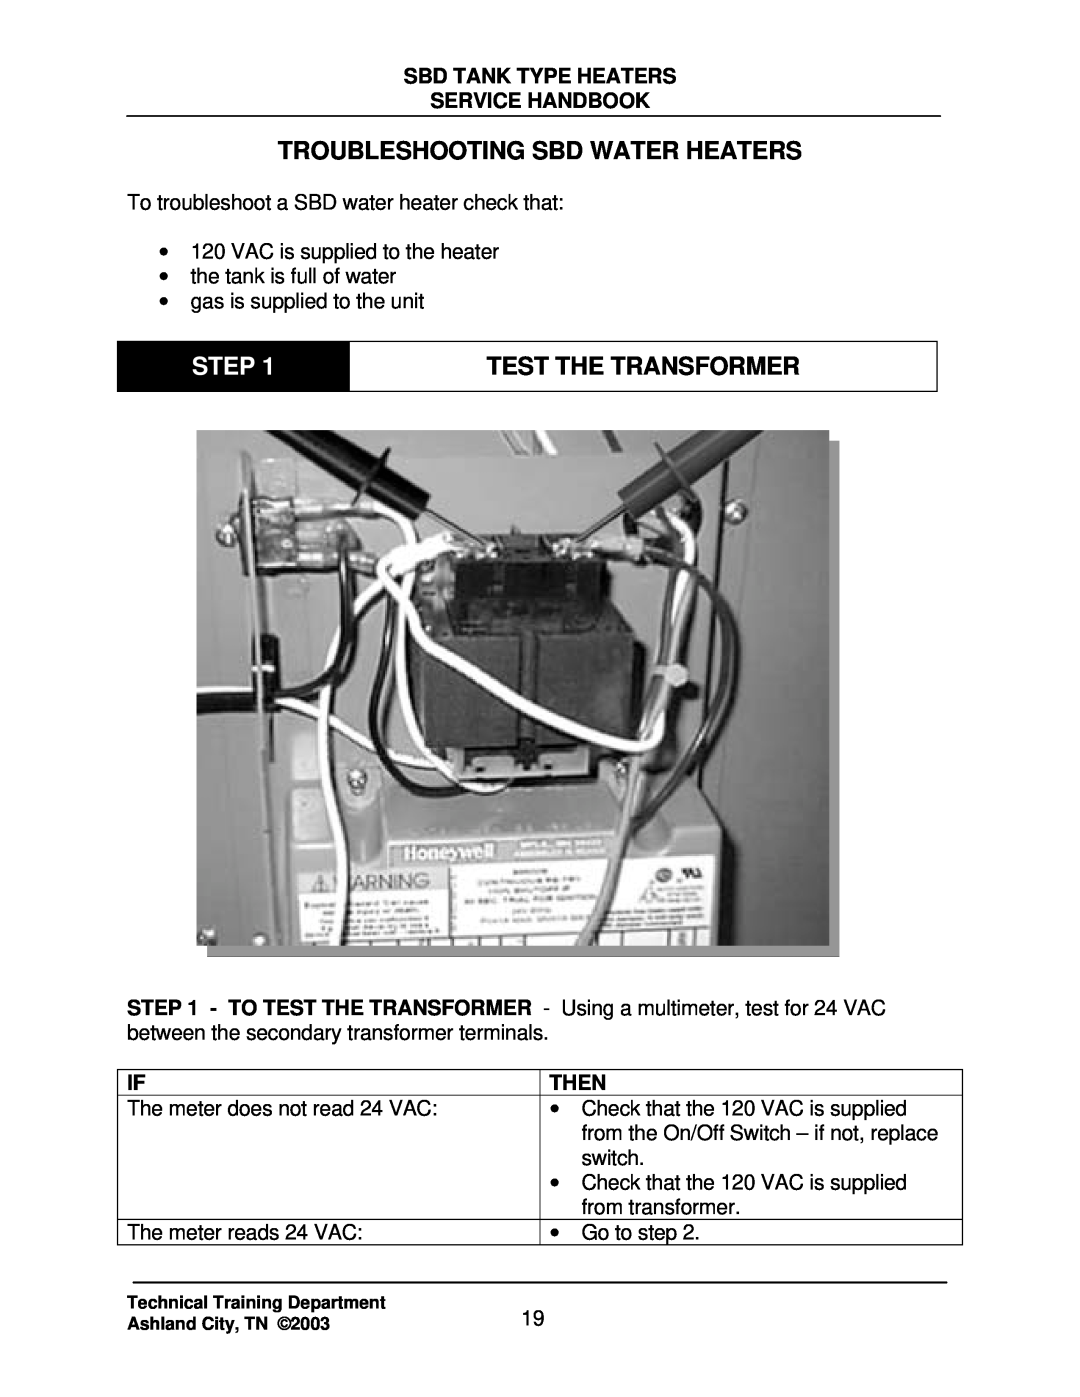 State Industries SBD85 500, SBD71 120 manual Troubleshooting Sbd Water Heaters, Step, Test The Transformer, Then 